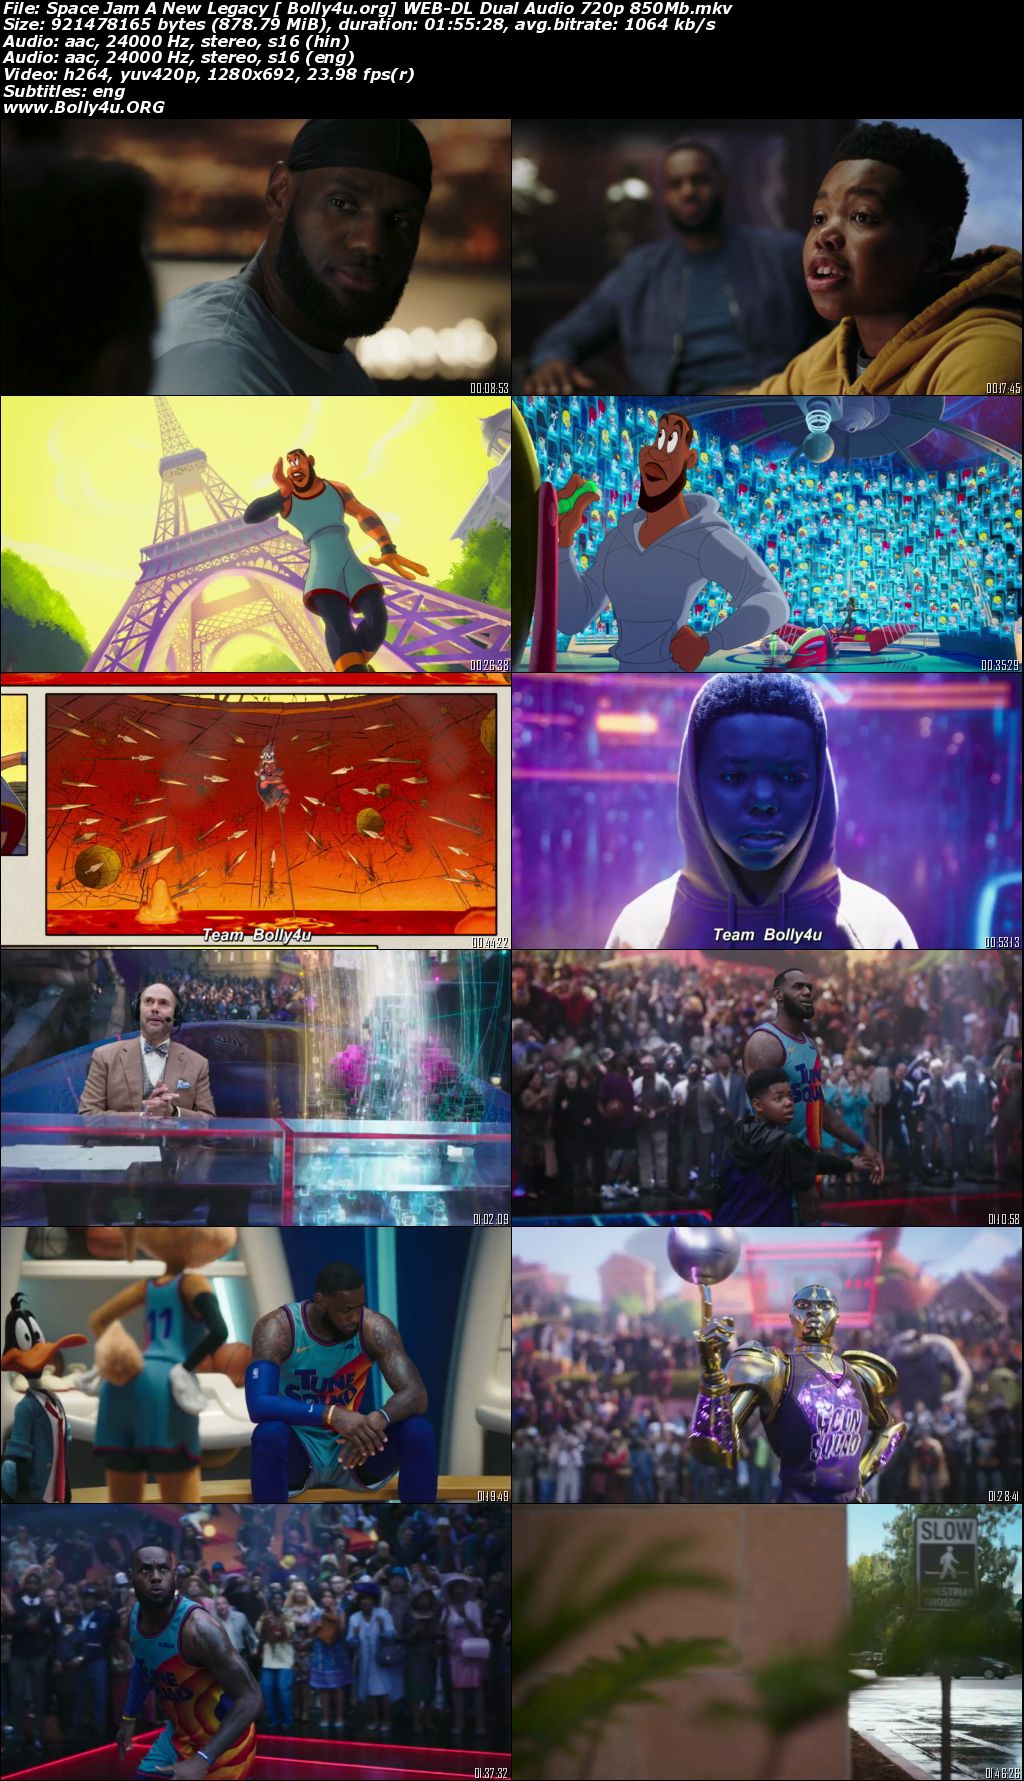 Space Jam A New Legacy 2021 WEB-DL 850Mb Hindi Dual Audio ORG 720p Download